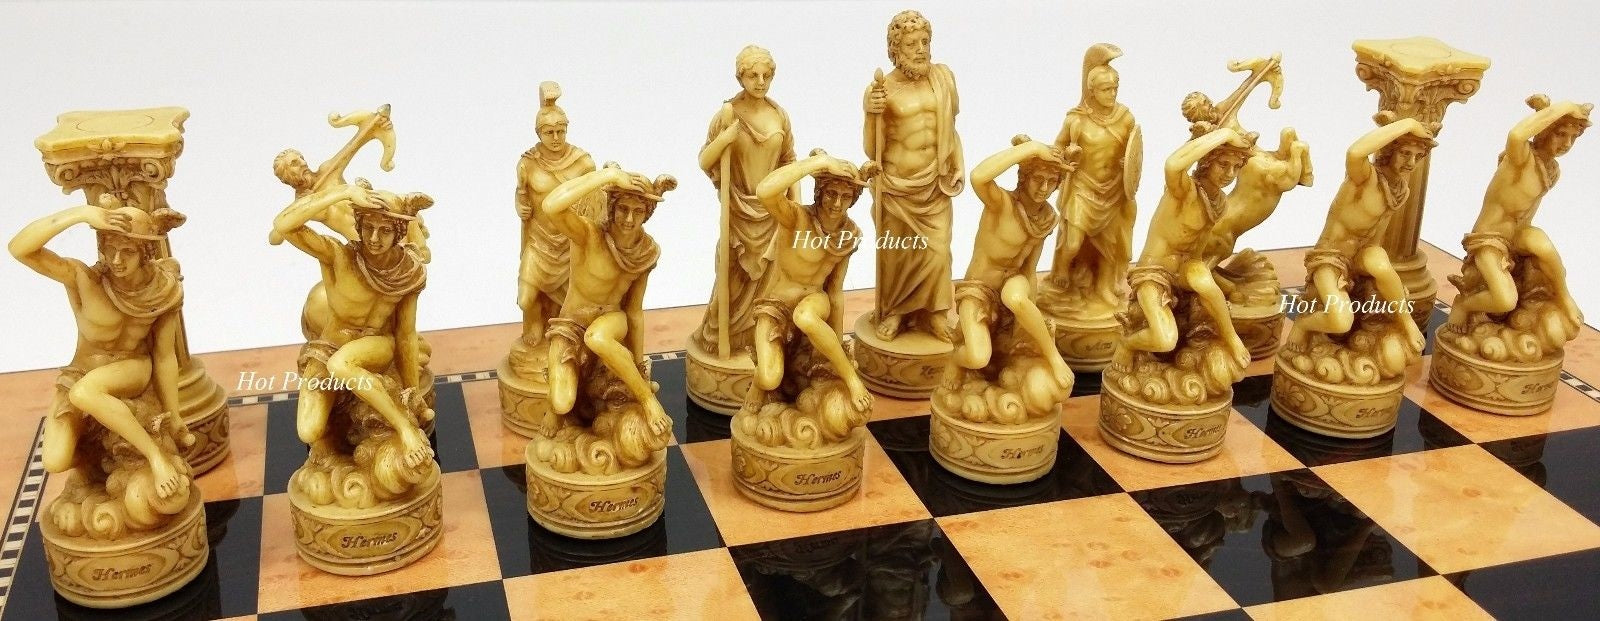 HERMES CHESS SET  Knight chess, Chess pieces, Chess board